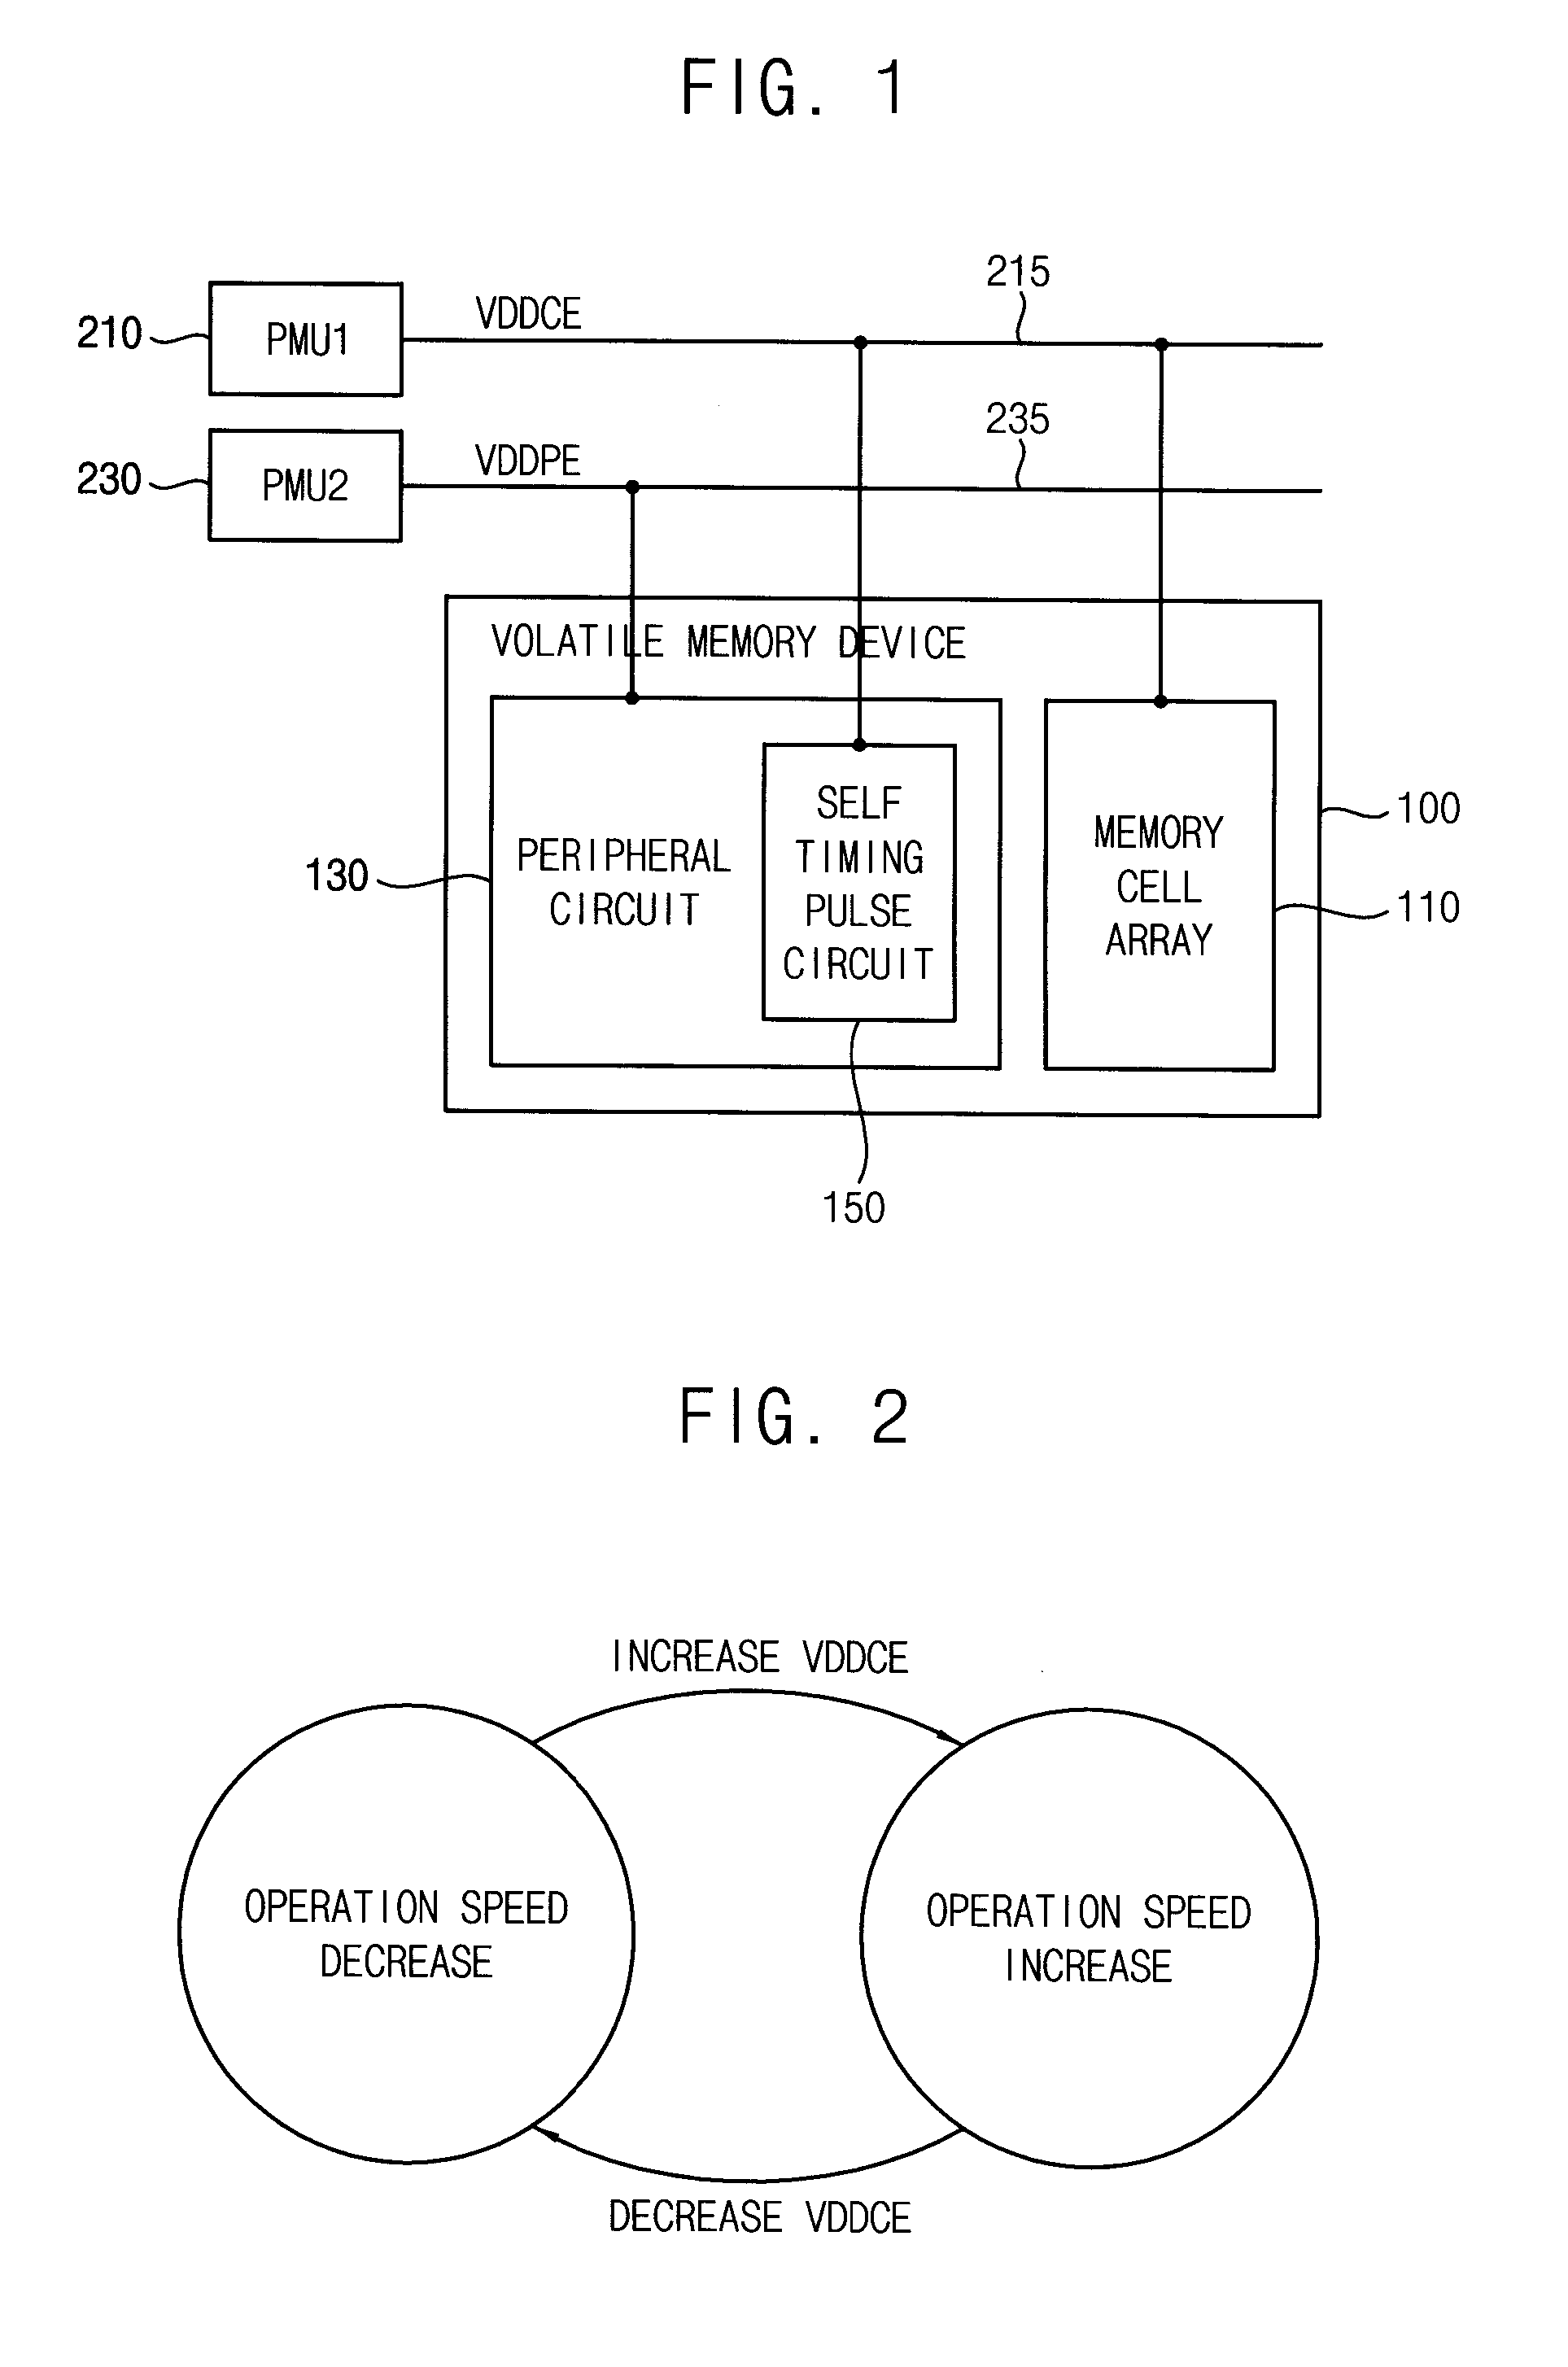 Volatile memory device and system-on-chip including the same